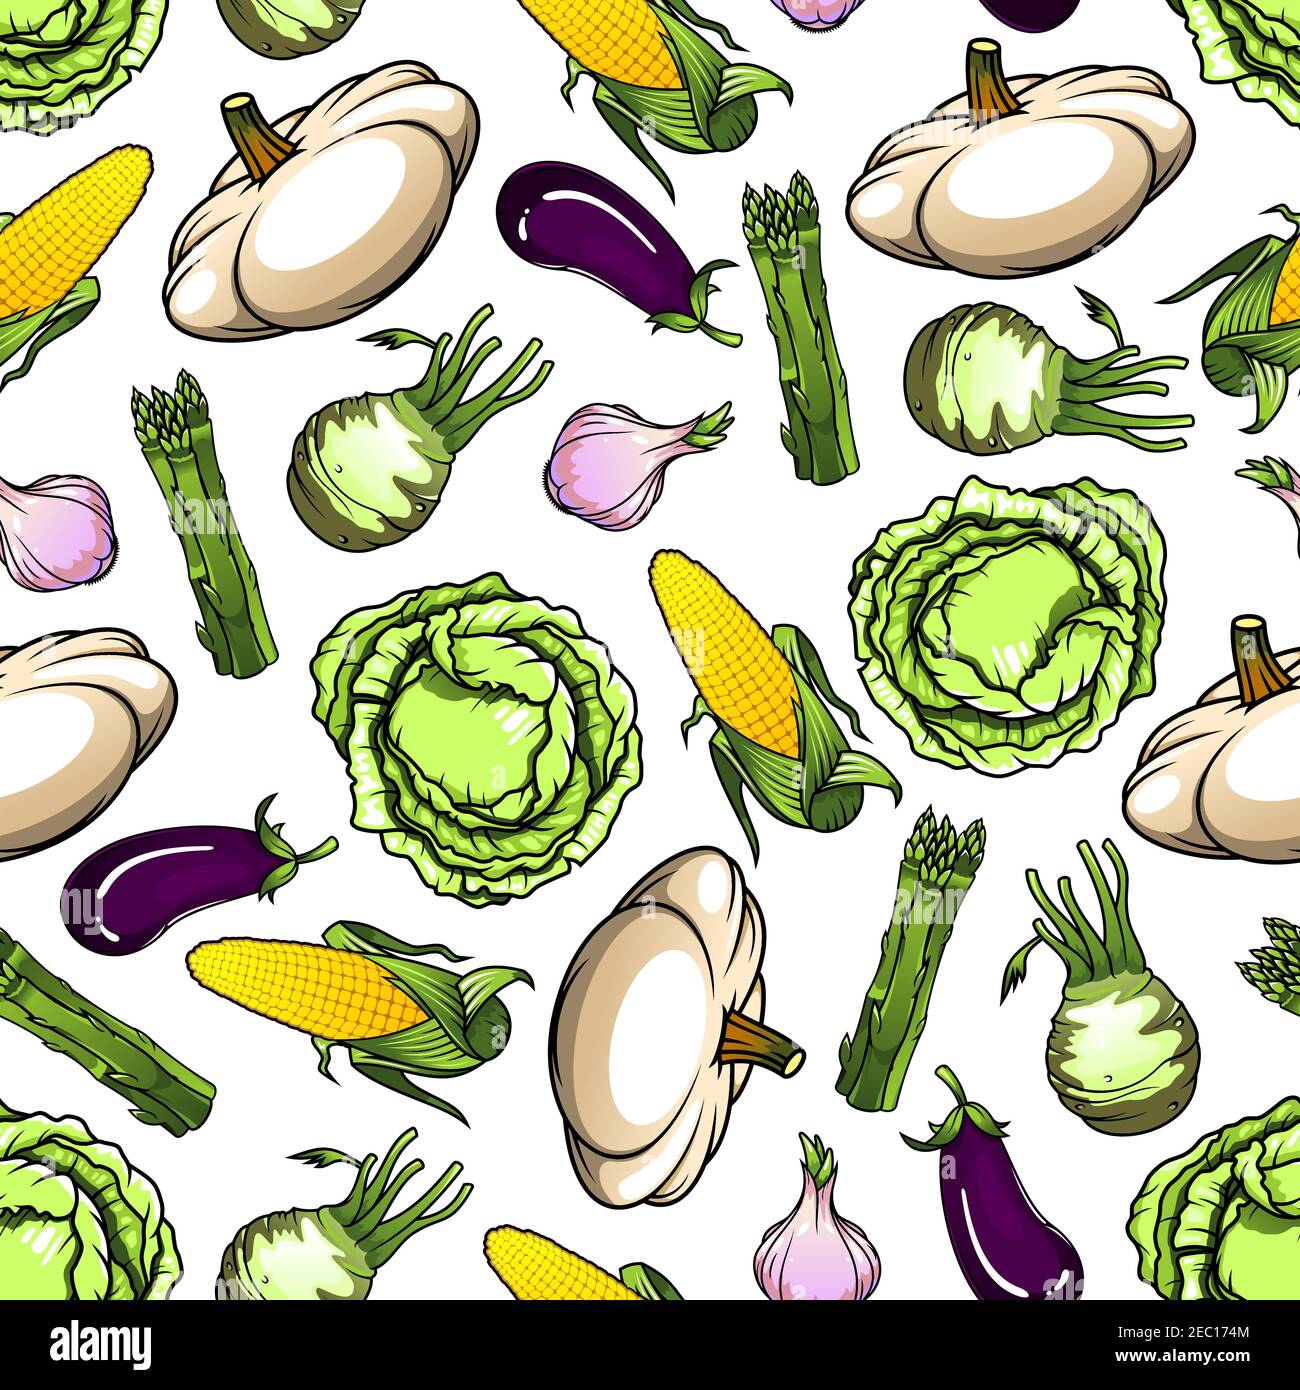 Farm green cabbages and sweet corn cobs, eggplants and spicy garlic, bunches of asparagus and pattypan squashes vegetables seamless pattern over white Stock Vector